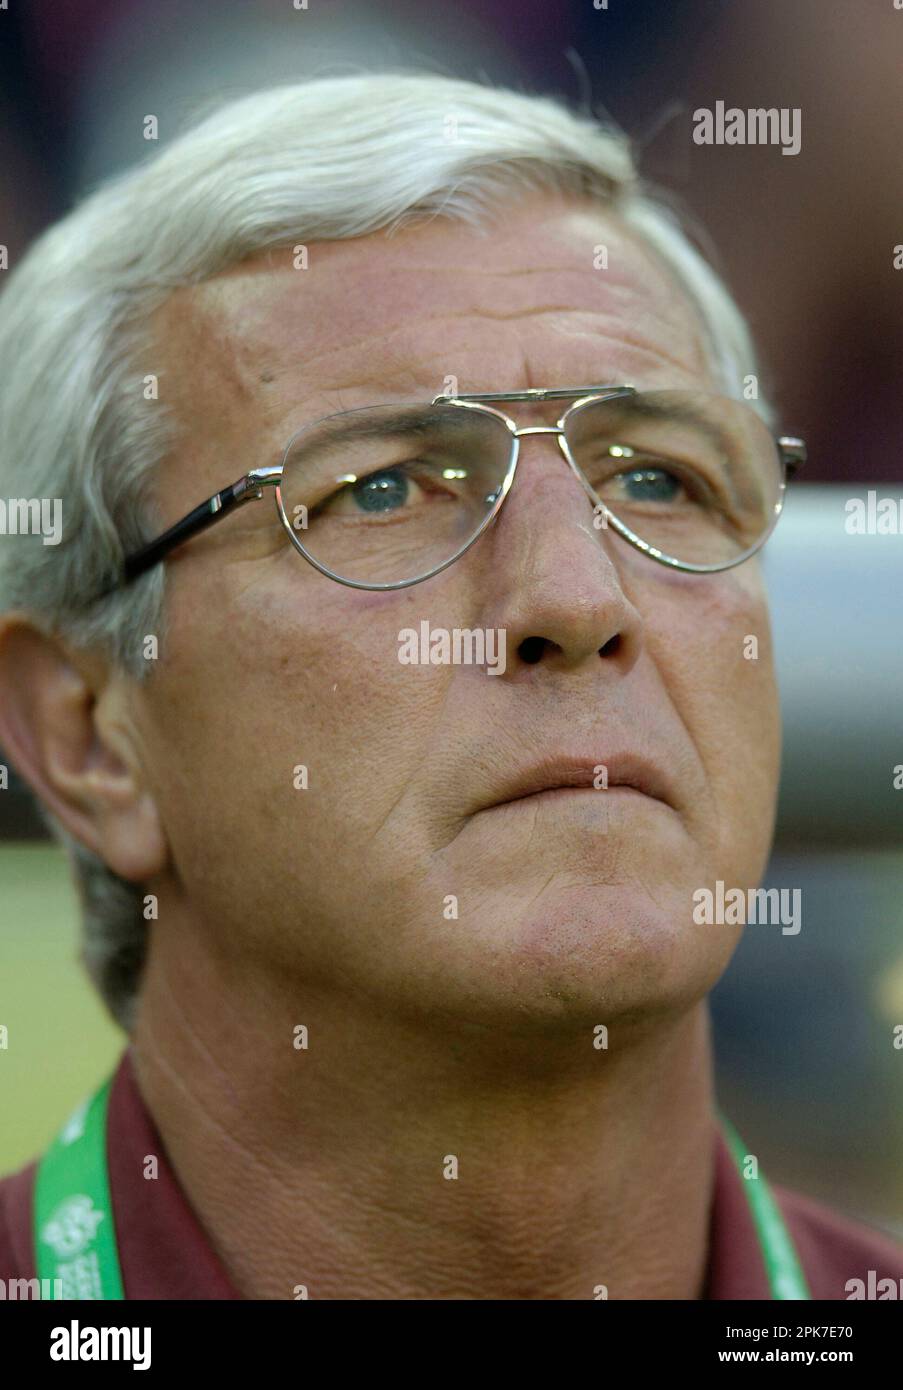 ARCHIVE PHOTO: Marcelo LIPPI will be 75 years old on April 11, 2023, Italy's national coach Marcello LIPPI, portrait, portrait, preliminary round, Italy (ITA) - United States of America (USA), on June 17, 2006 in Kaiserslautern; Soccer World Cup 2006 FIFA World Cup 2006, from 09.06. - 09.07.2006 in Germany ?Sven Simon # Princess-Luise-Str. 41 # 45479 M uelheim/R uhr # tel. 0208/9413250#fax. 0208/9413260 # Account 1428150 Commerzbank Essen BLZ 36040039 # www.SvenSimon.net. Stock Photo